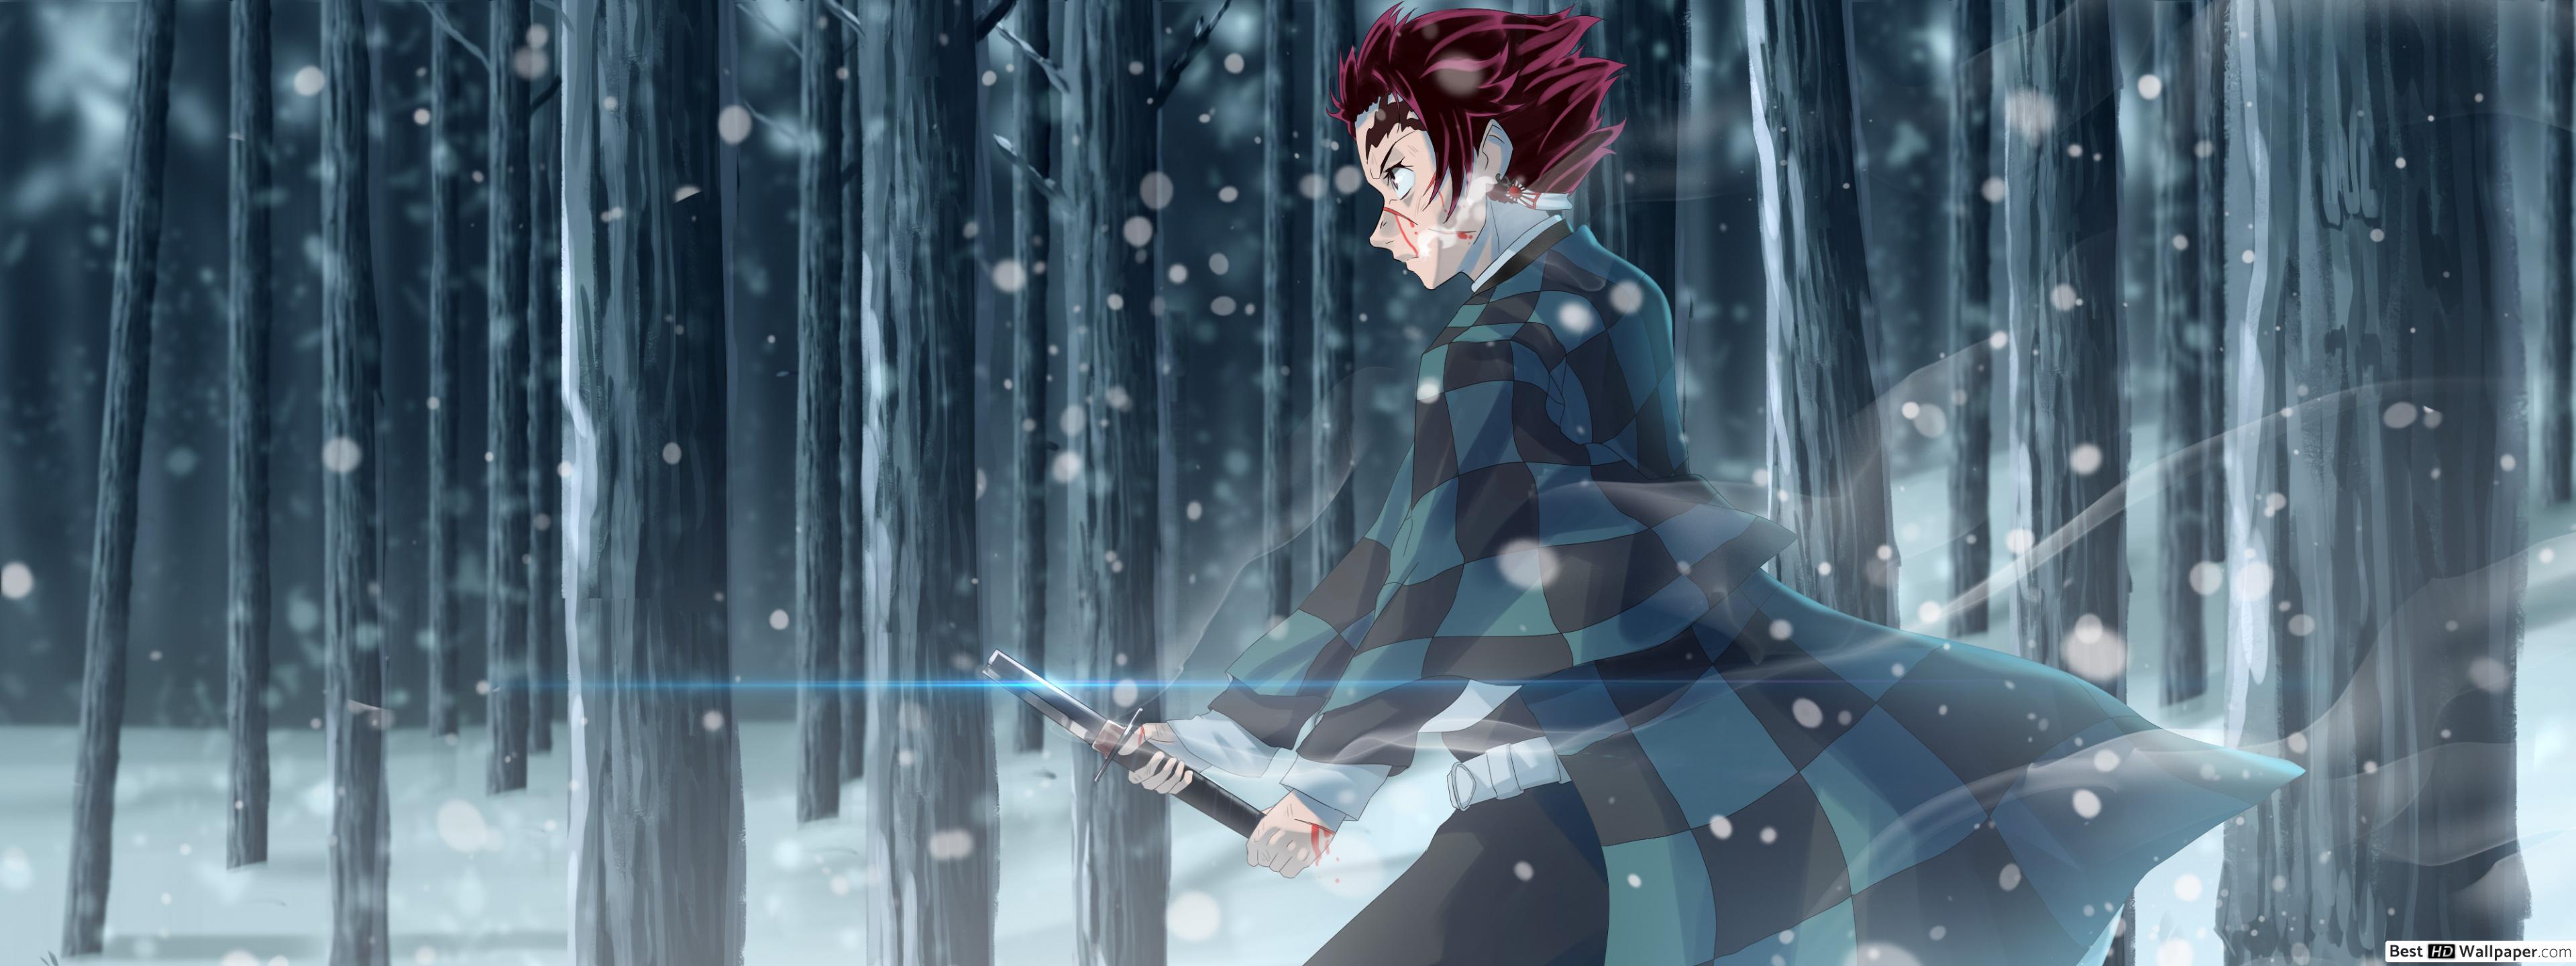 Kimetsu No Yaiba Dual Monitor Wallpaper & Background Beautiful Best Available For Download Kimetsu No Yaiba Dual Monitor Photo Free On Zicxa.com Image